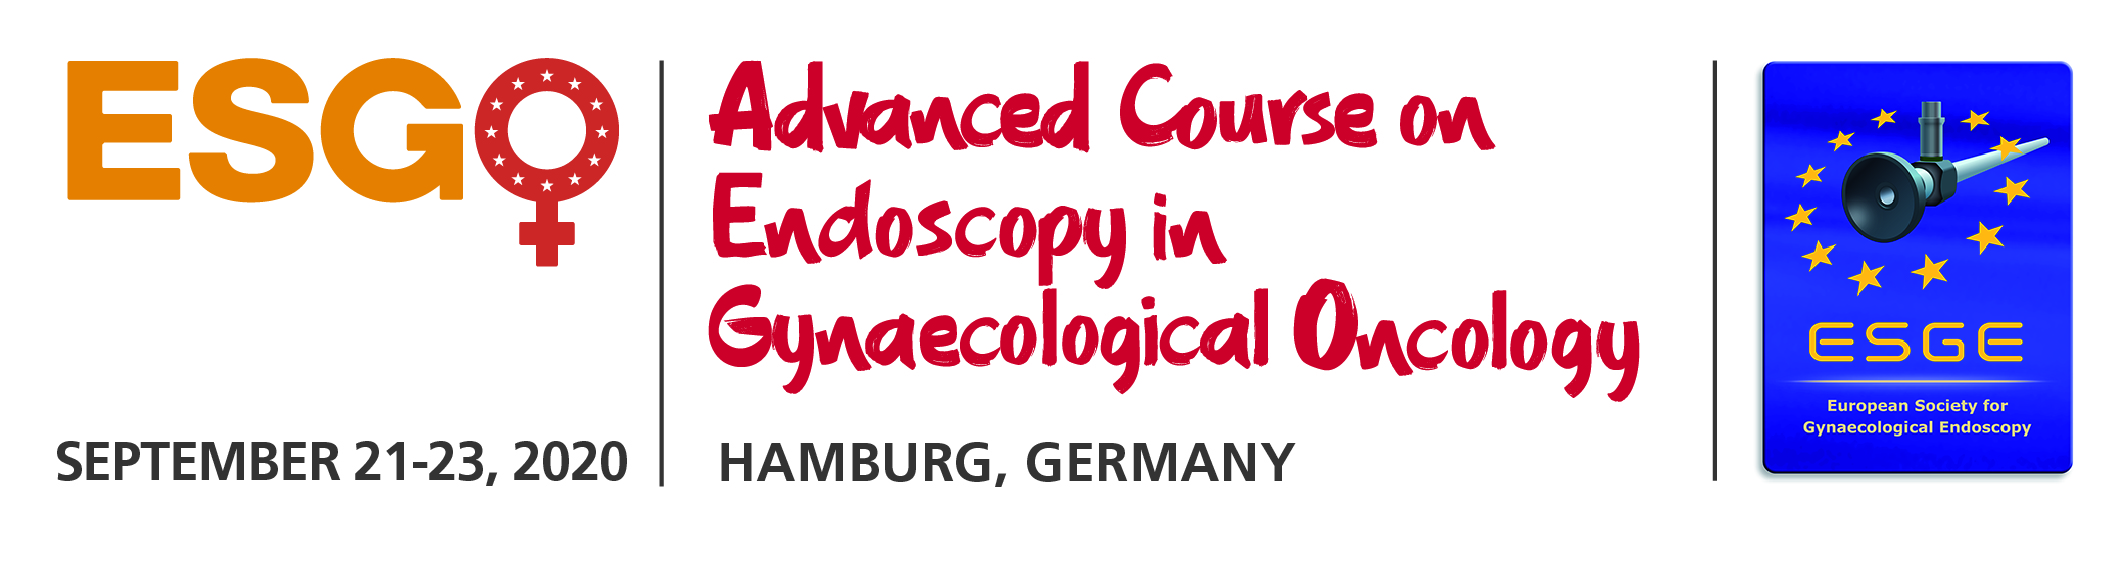 Course on Endoscopy in Gynaecological Oncology_v3_jpg